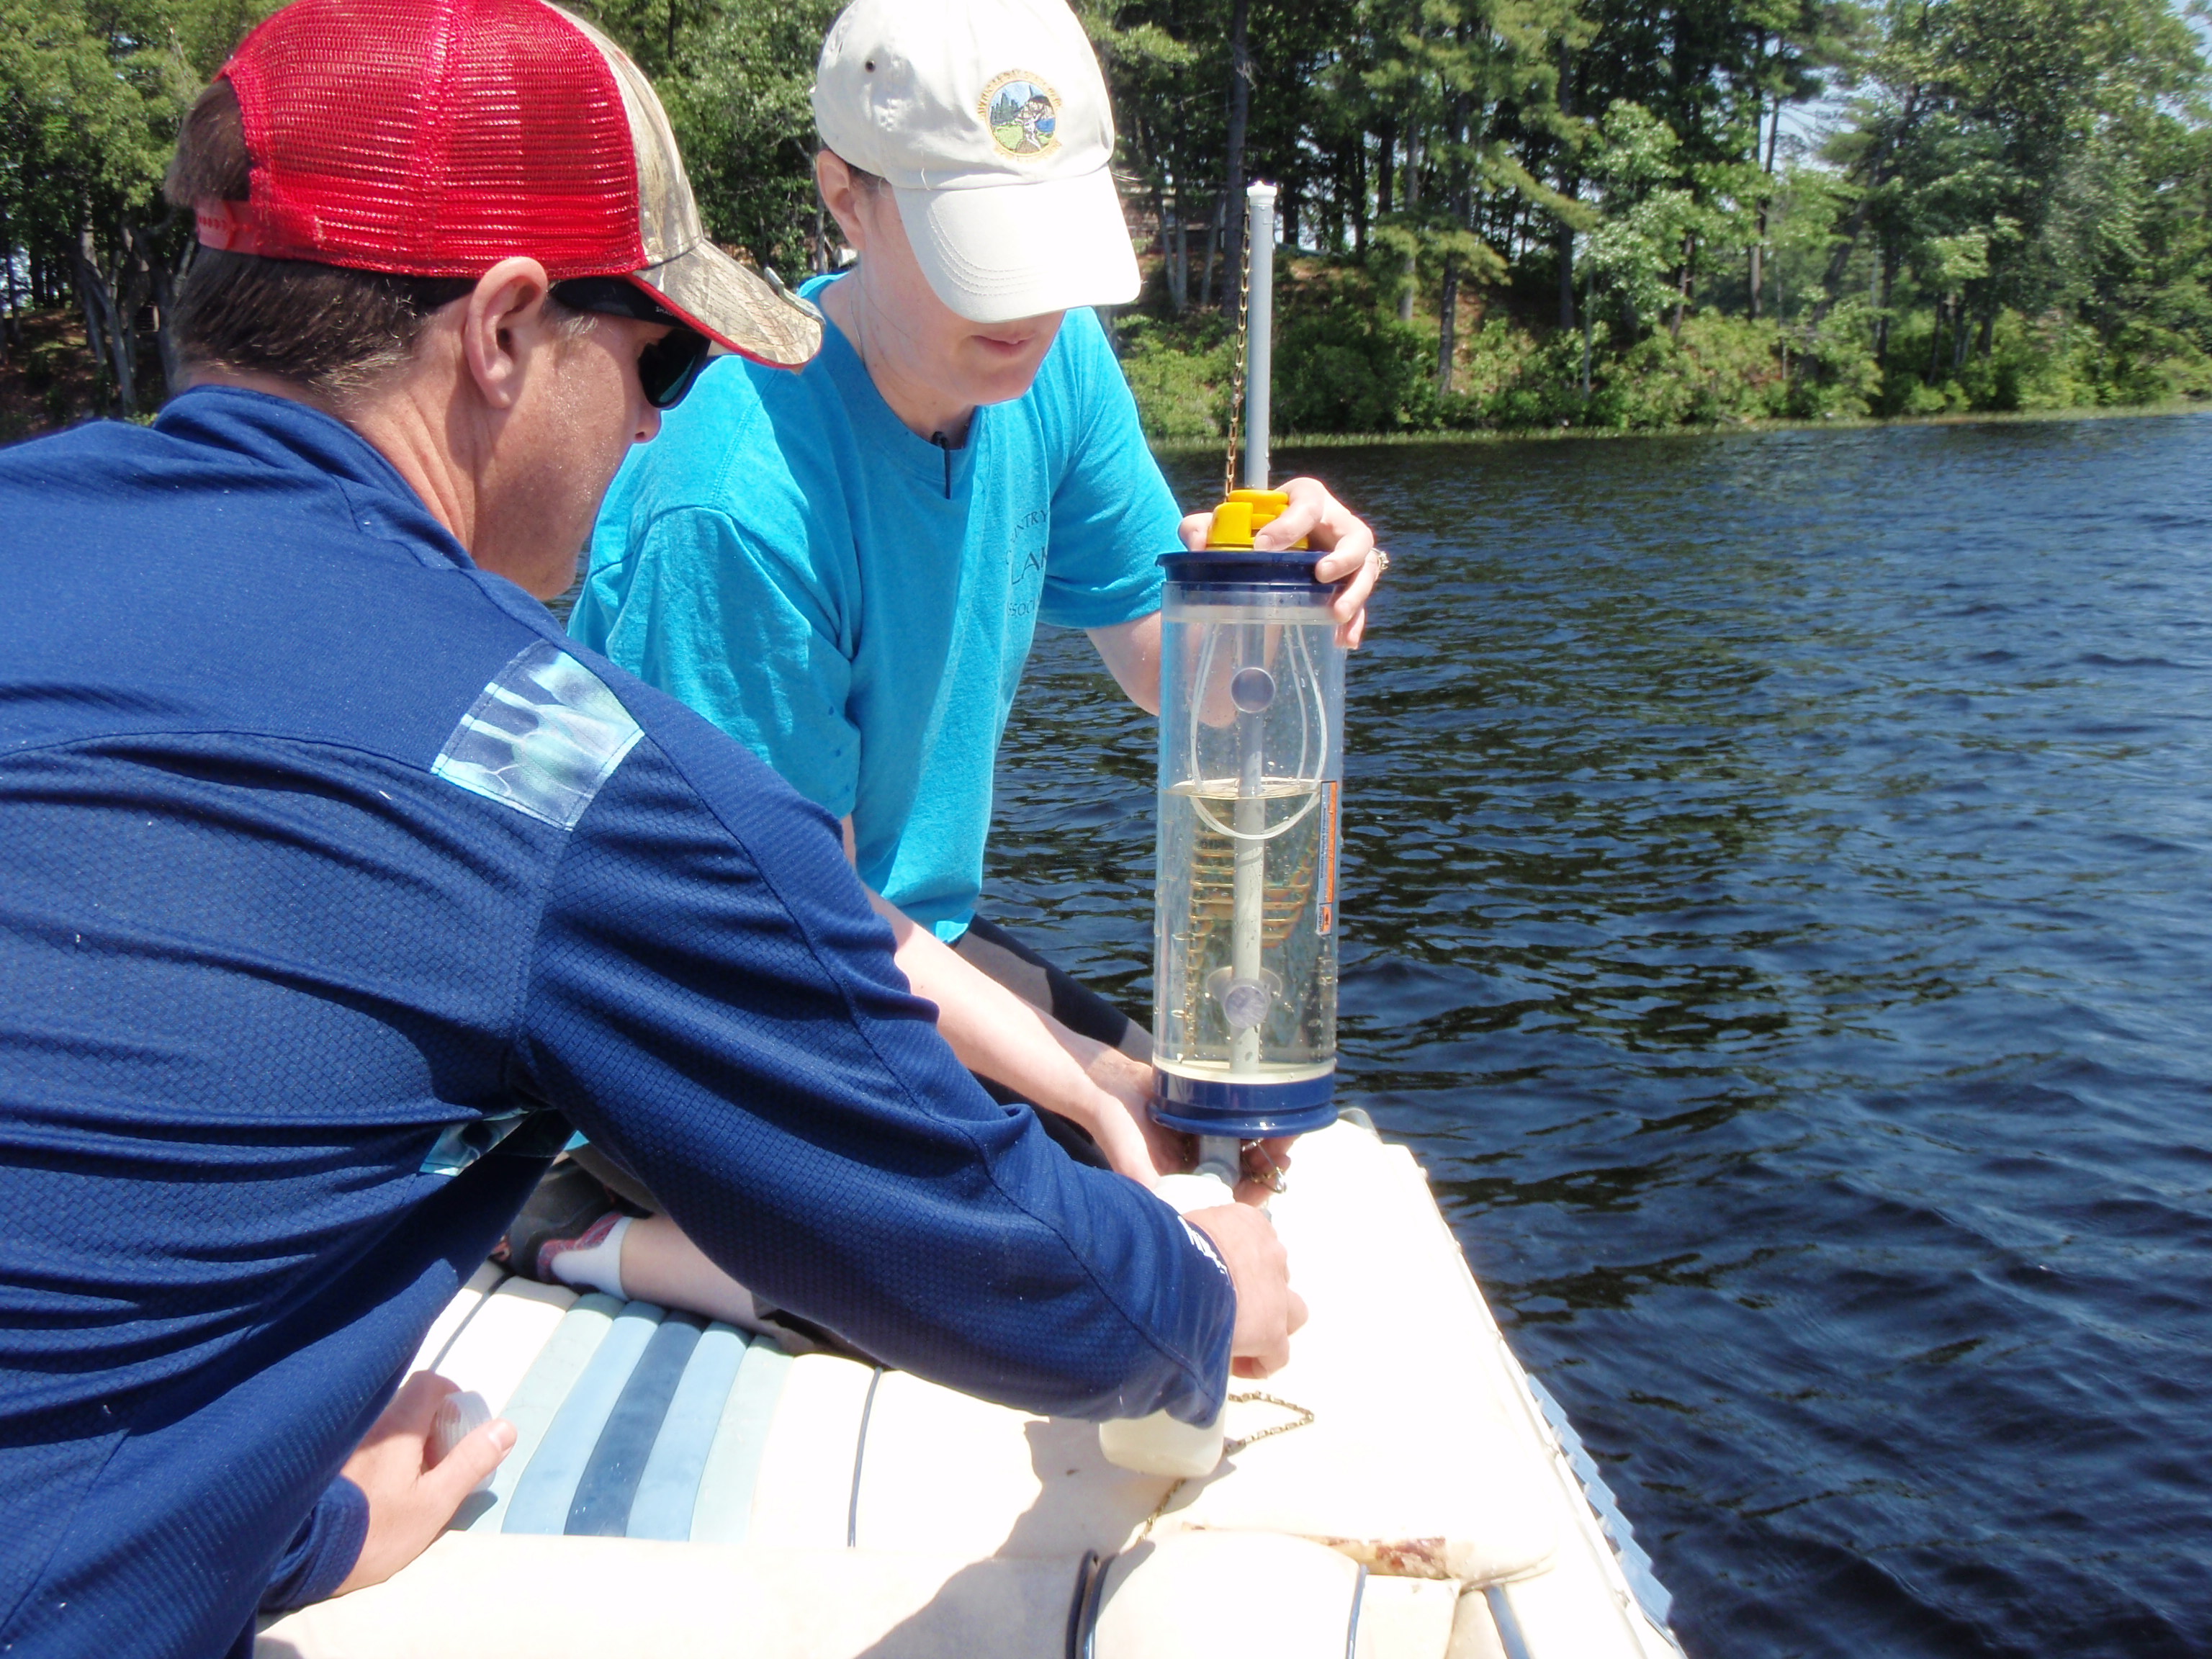  two volunteers collect a water sample from Country Pond